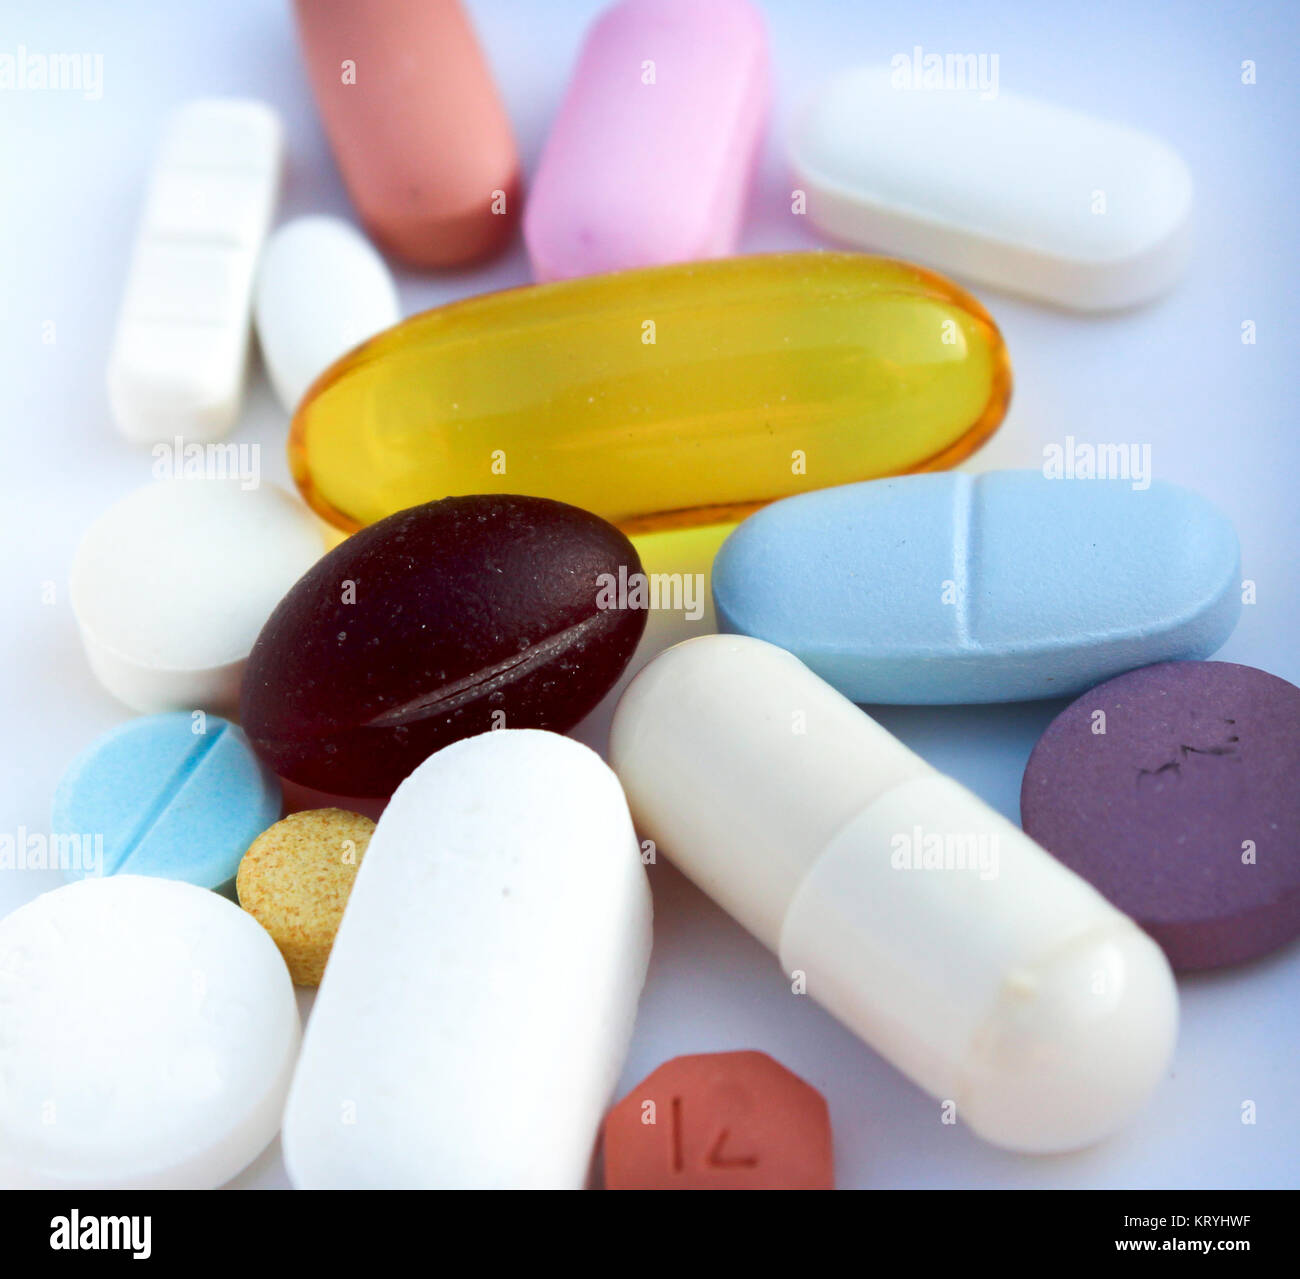 Close up of a variety of prescription drugs and vitamins on a bluish hospital like background Stock Photo